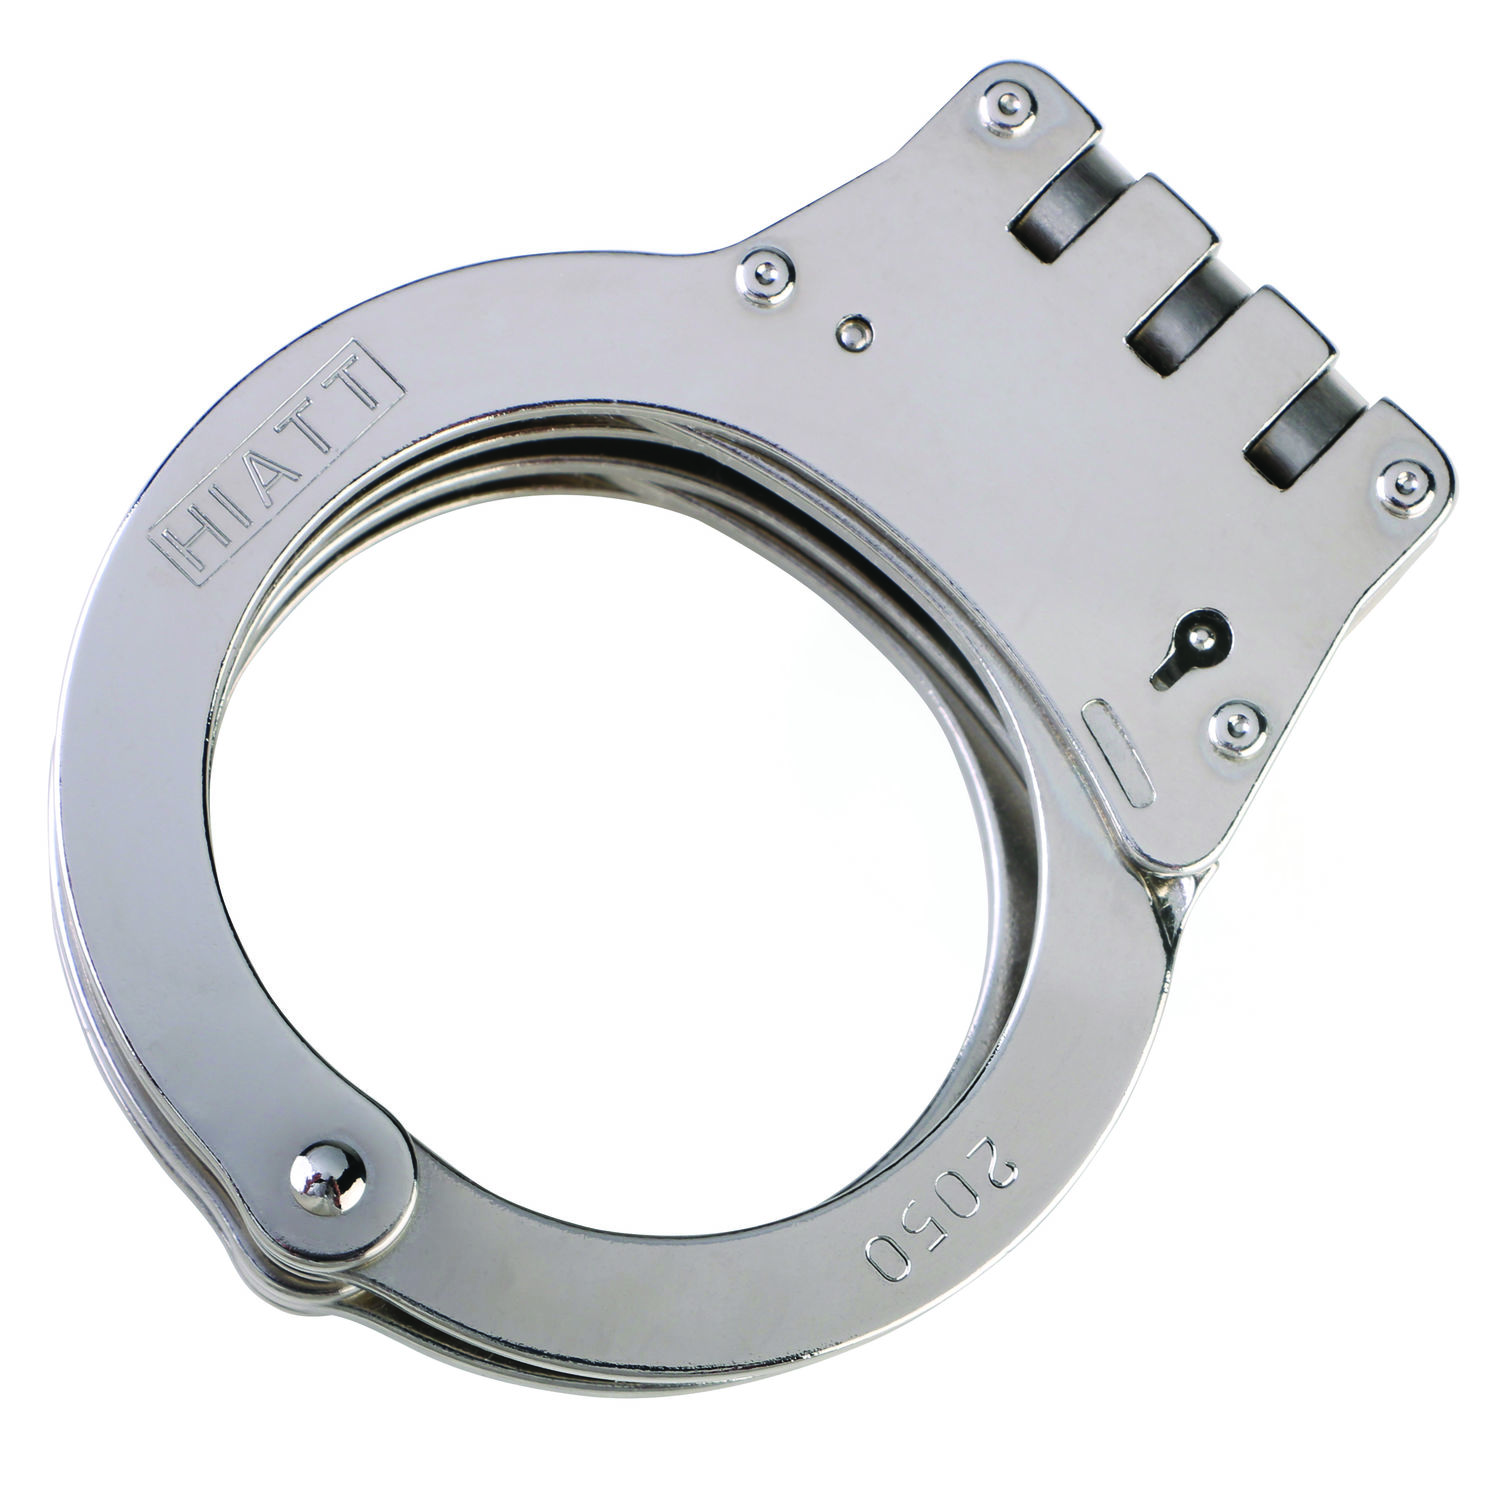 Standard Steel Hinge Handcuffs with Nickel Finish - The Safariland Group